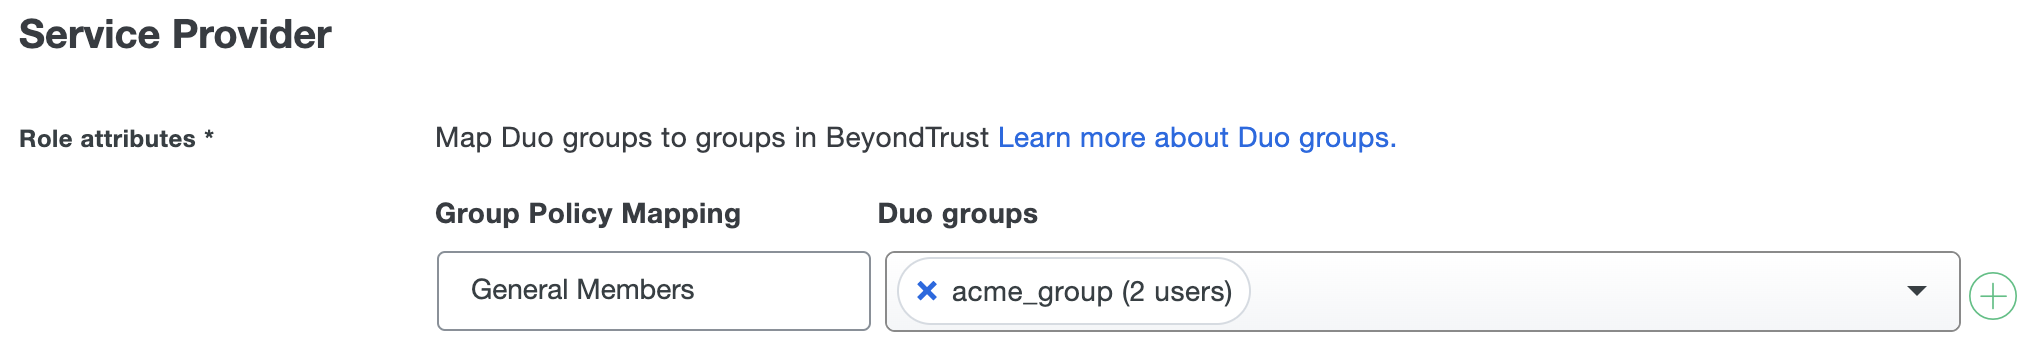 Duo BeyondTrust Role Attributes Fields